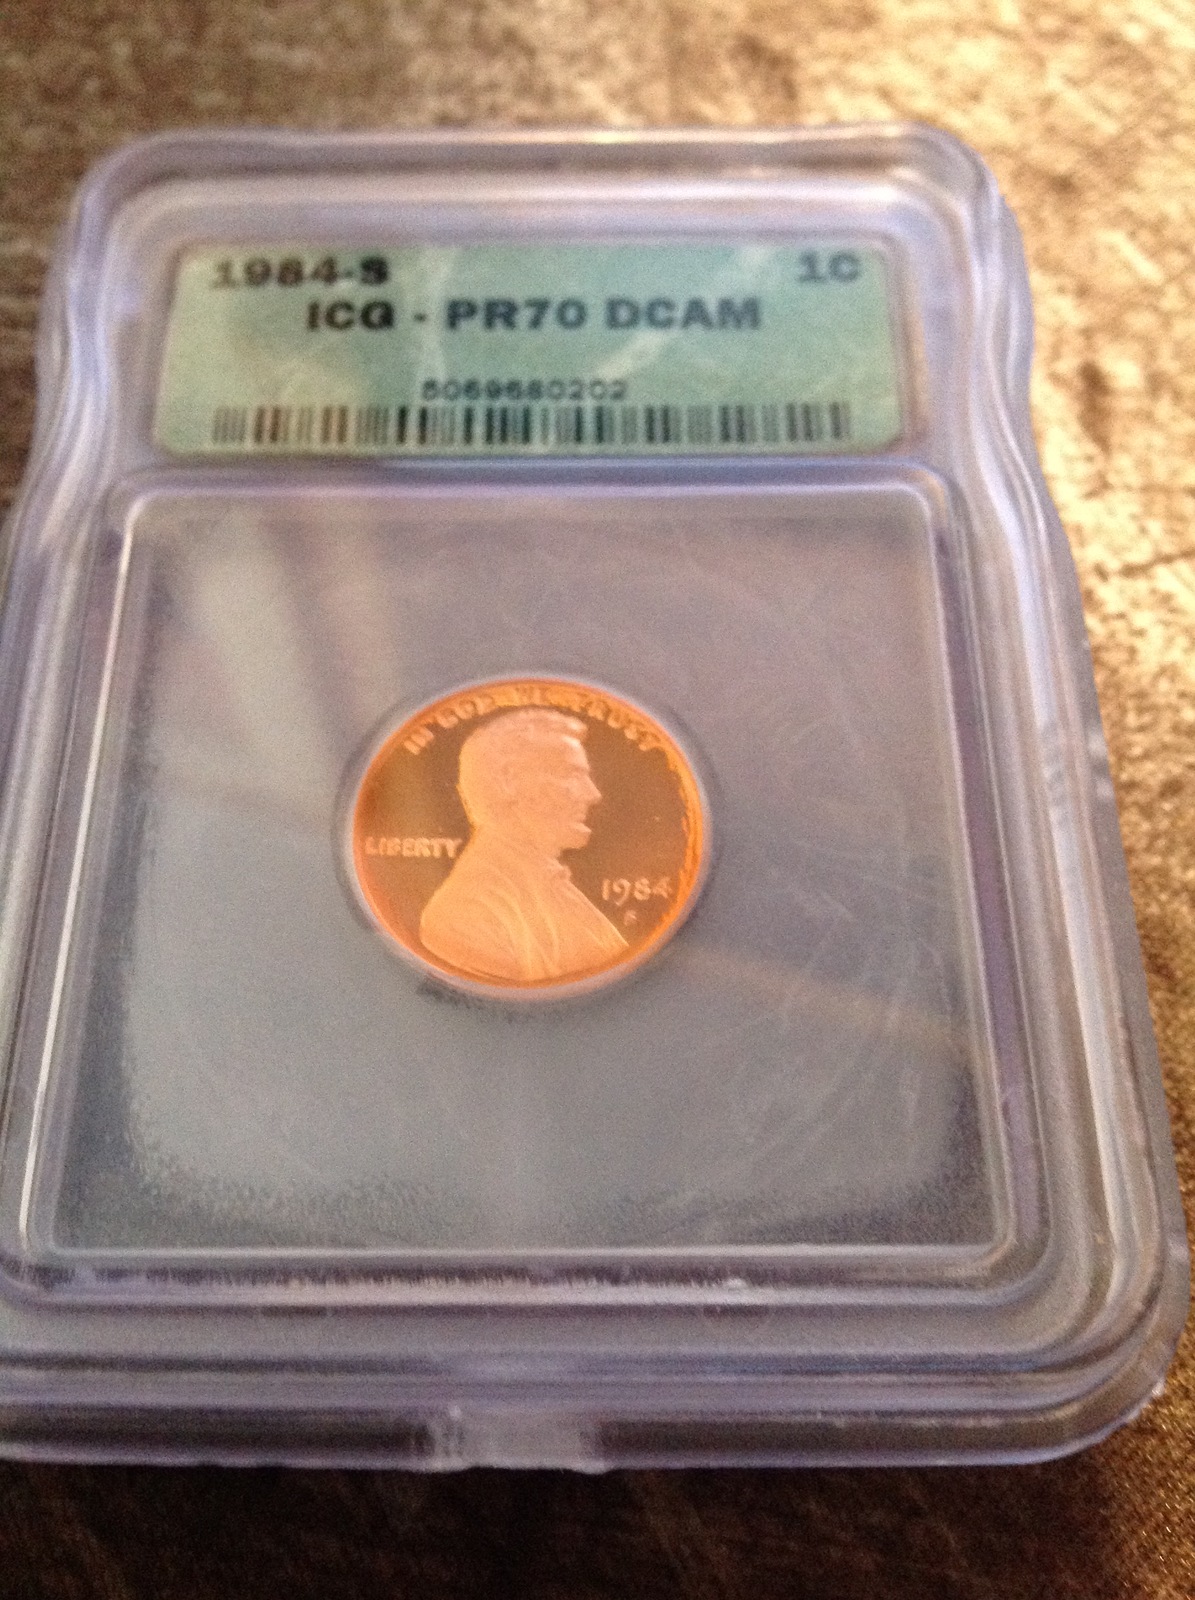 1984-S  Lincoln Cent Proof 70DC  ICG - $199.99